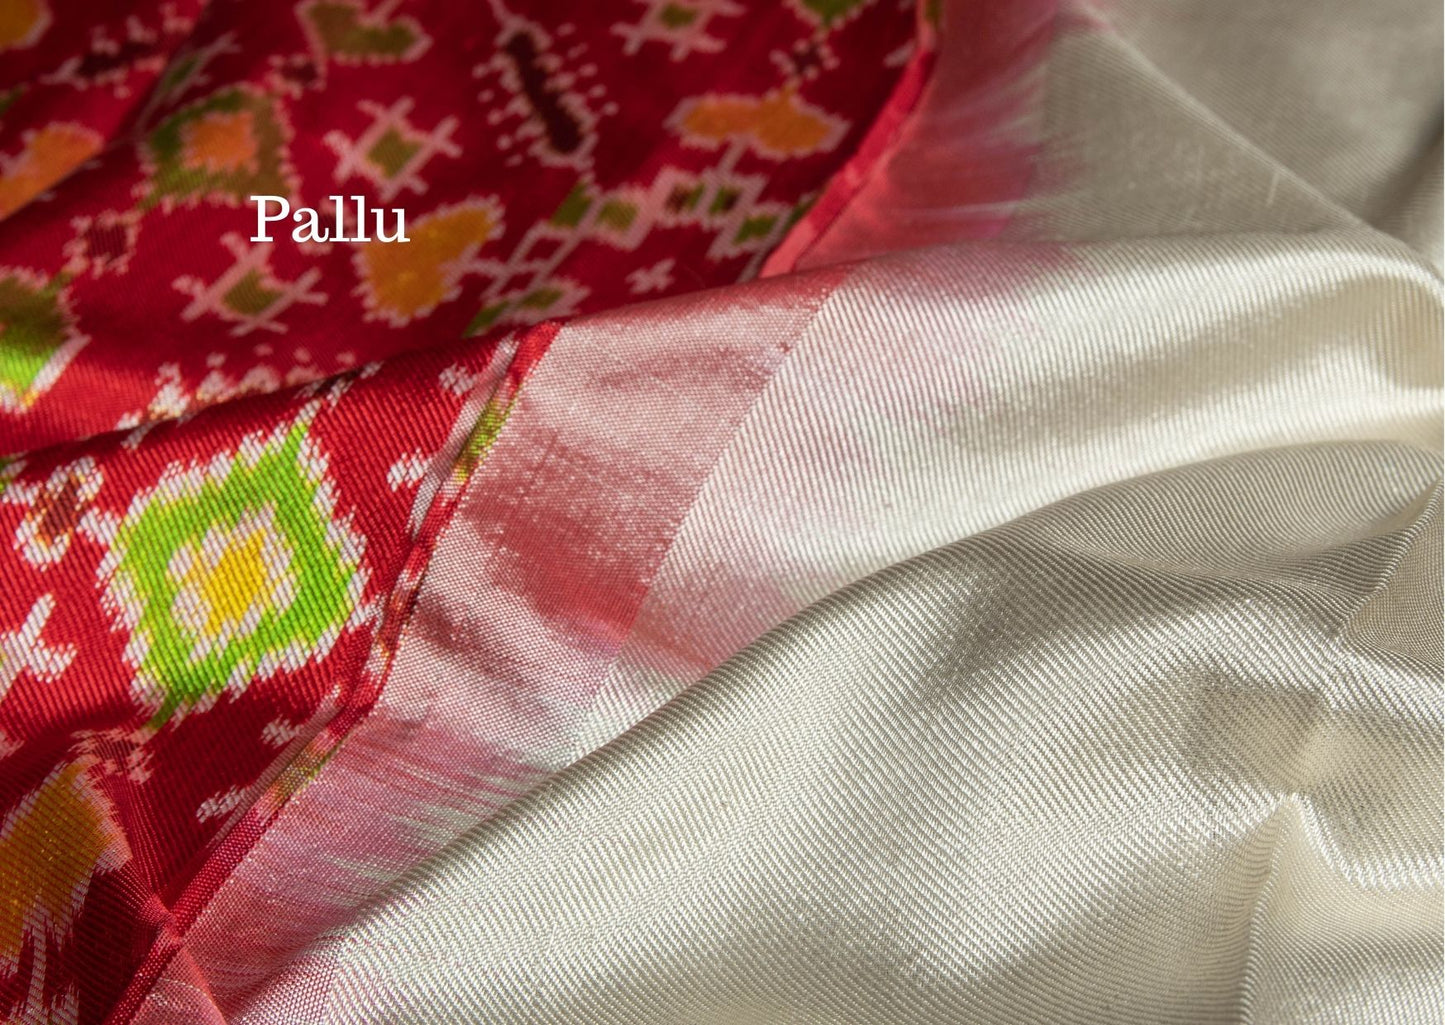 Twill Weave Ikat Silk Saree in White and Red